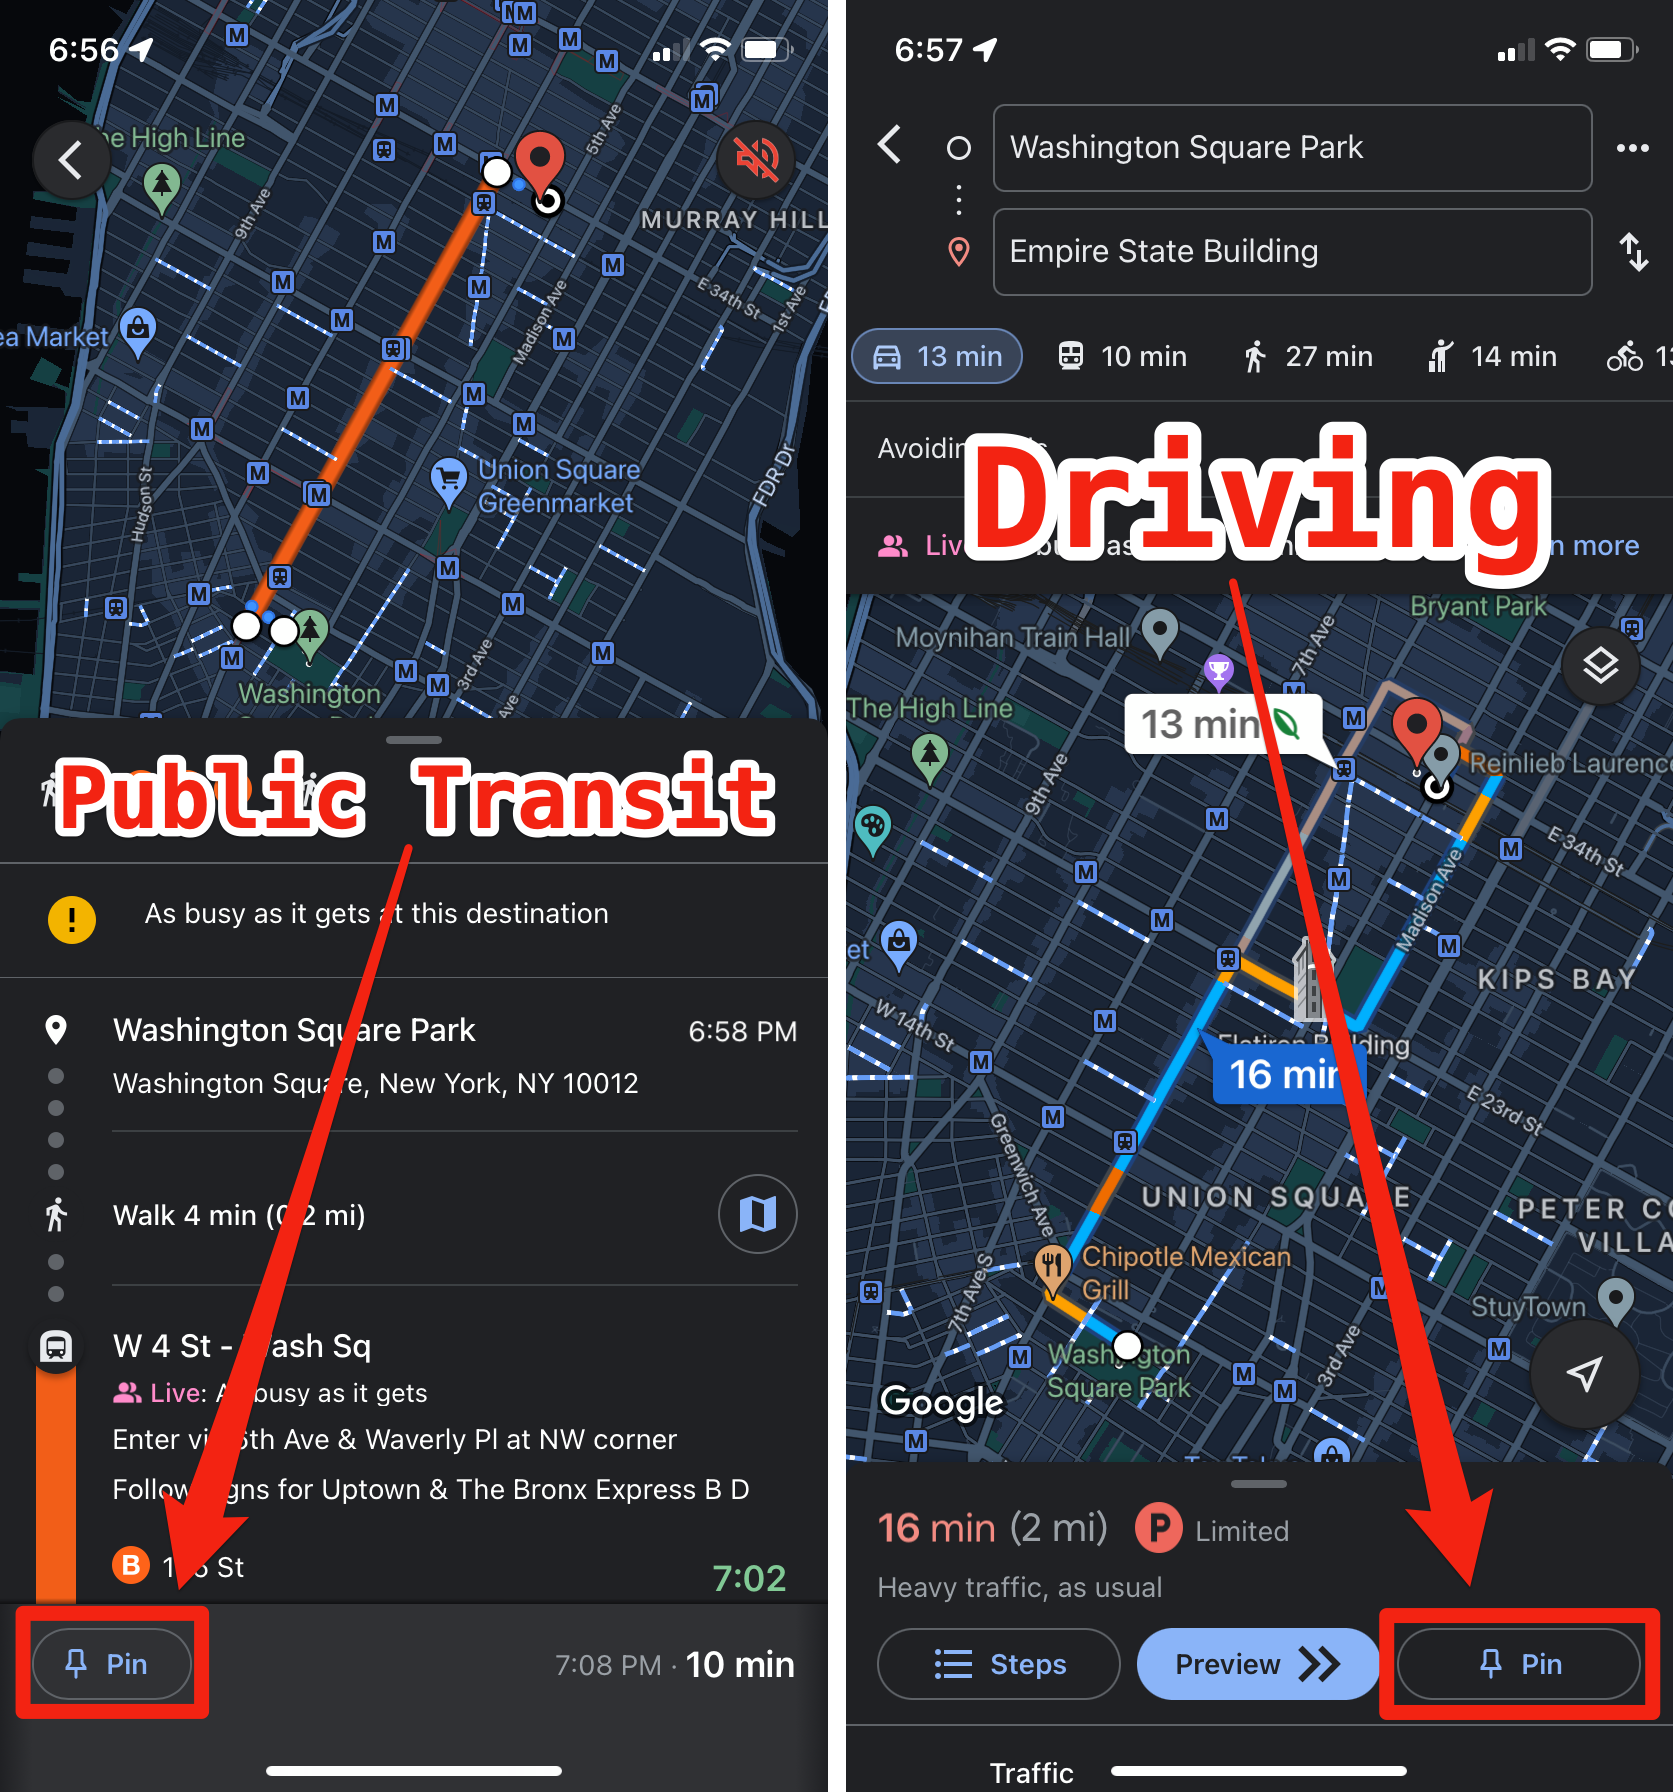 Showing the "Pin" button in Google Maps when asking for public transit or driving directions.